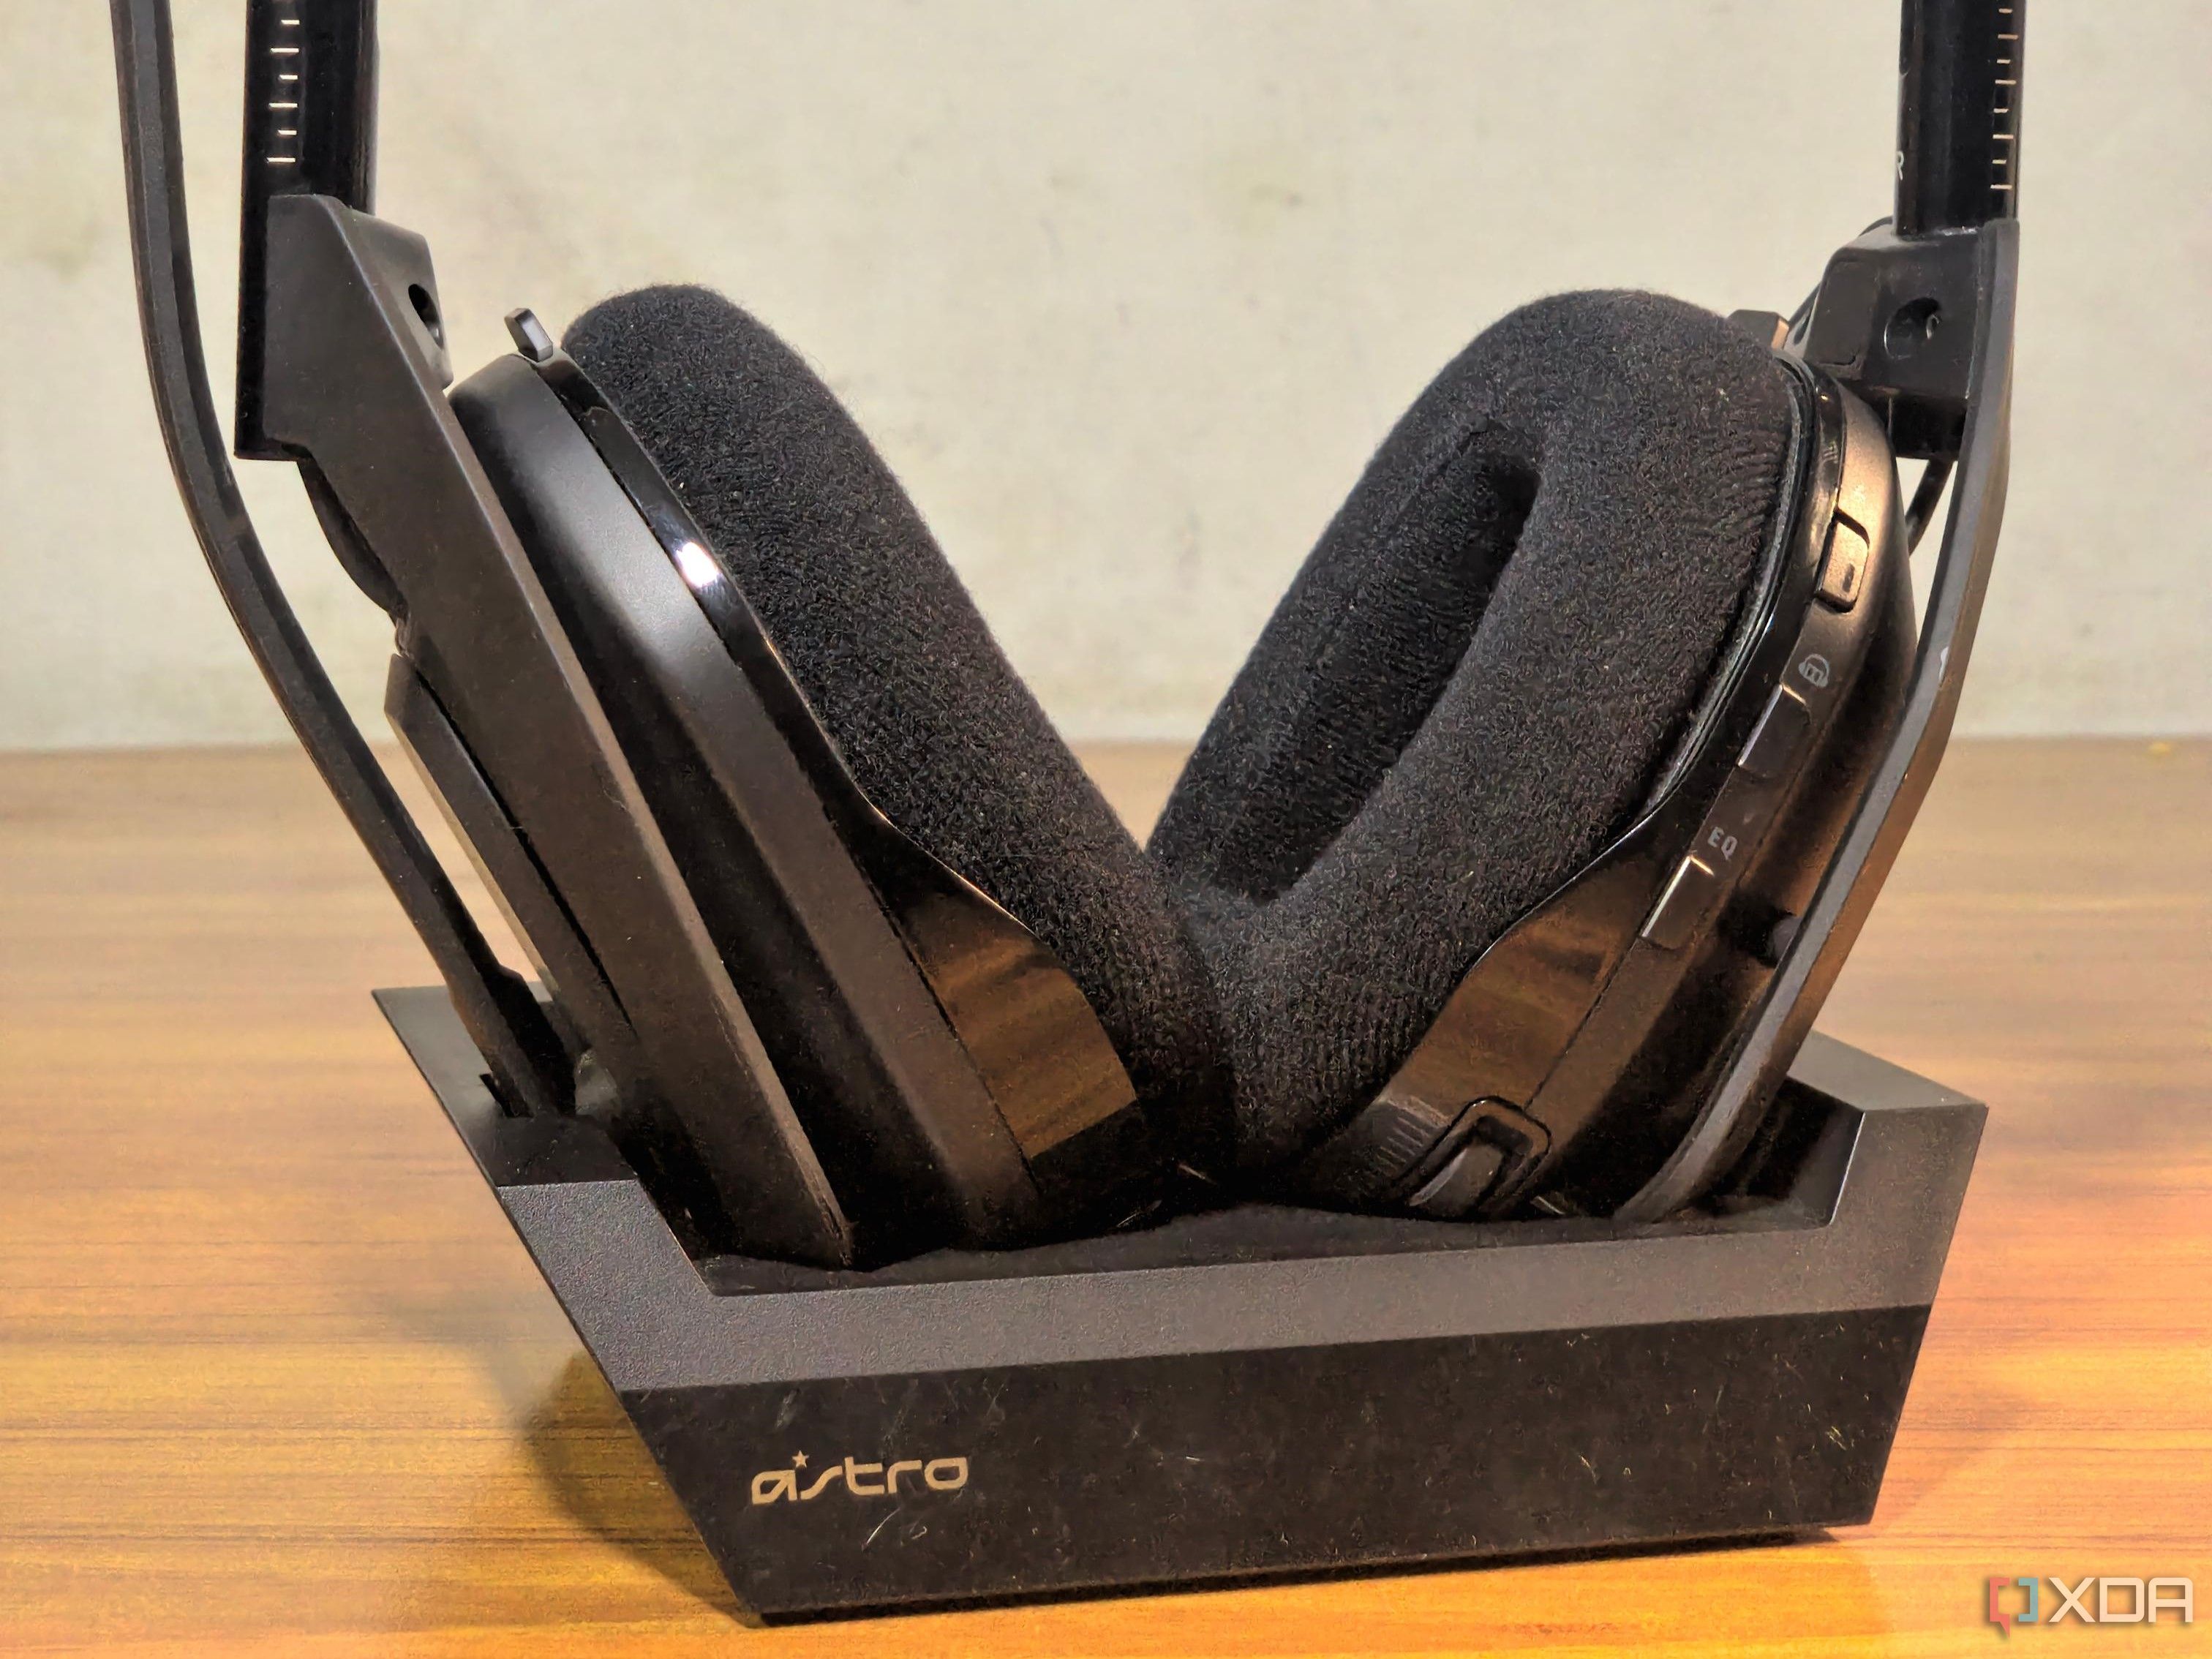 Astro's new A50 model solves the big problem with wireless gaming headsets